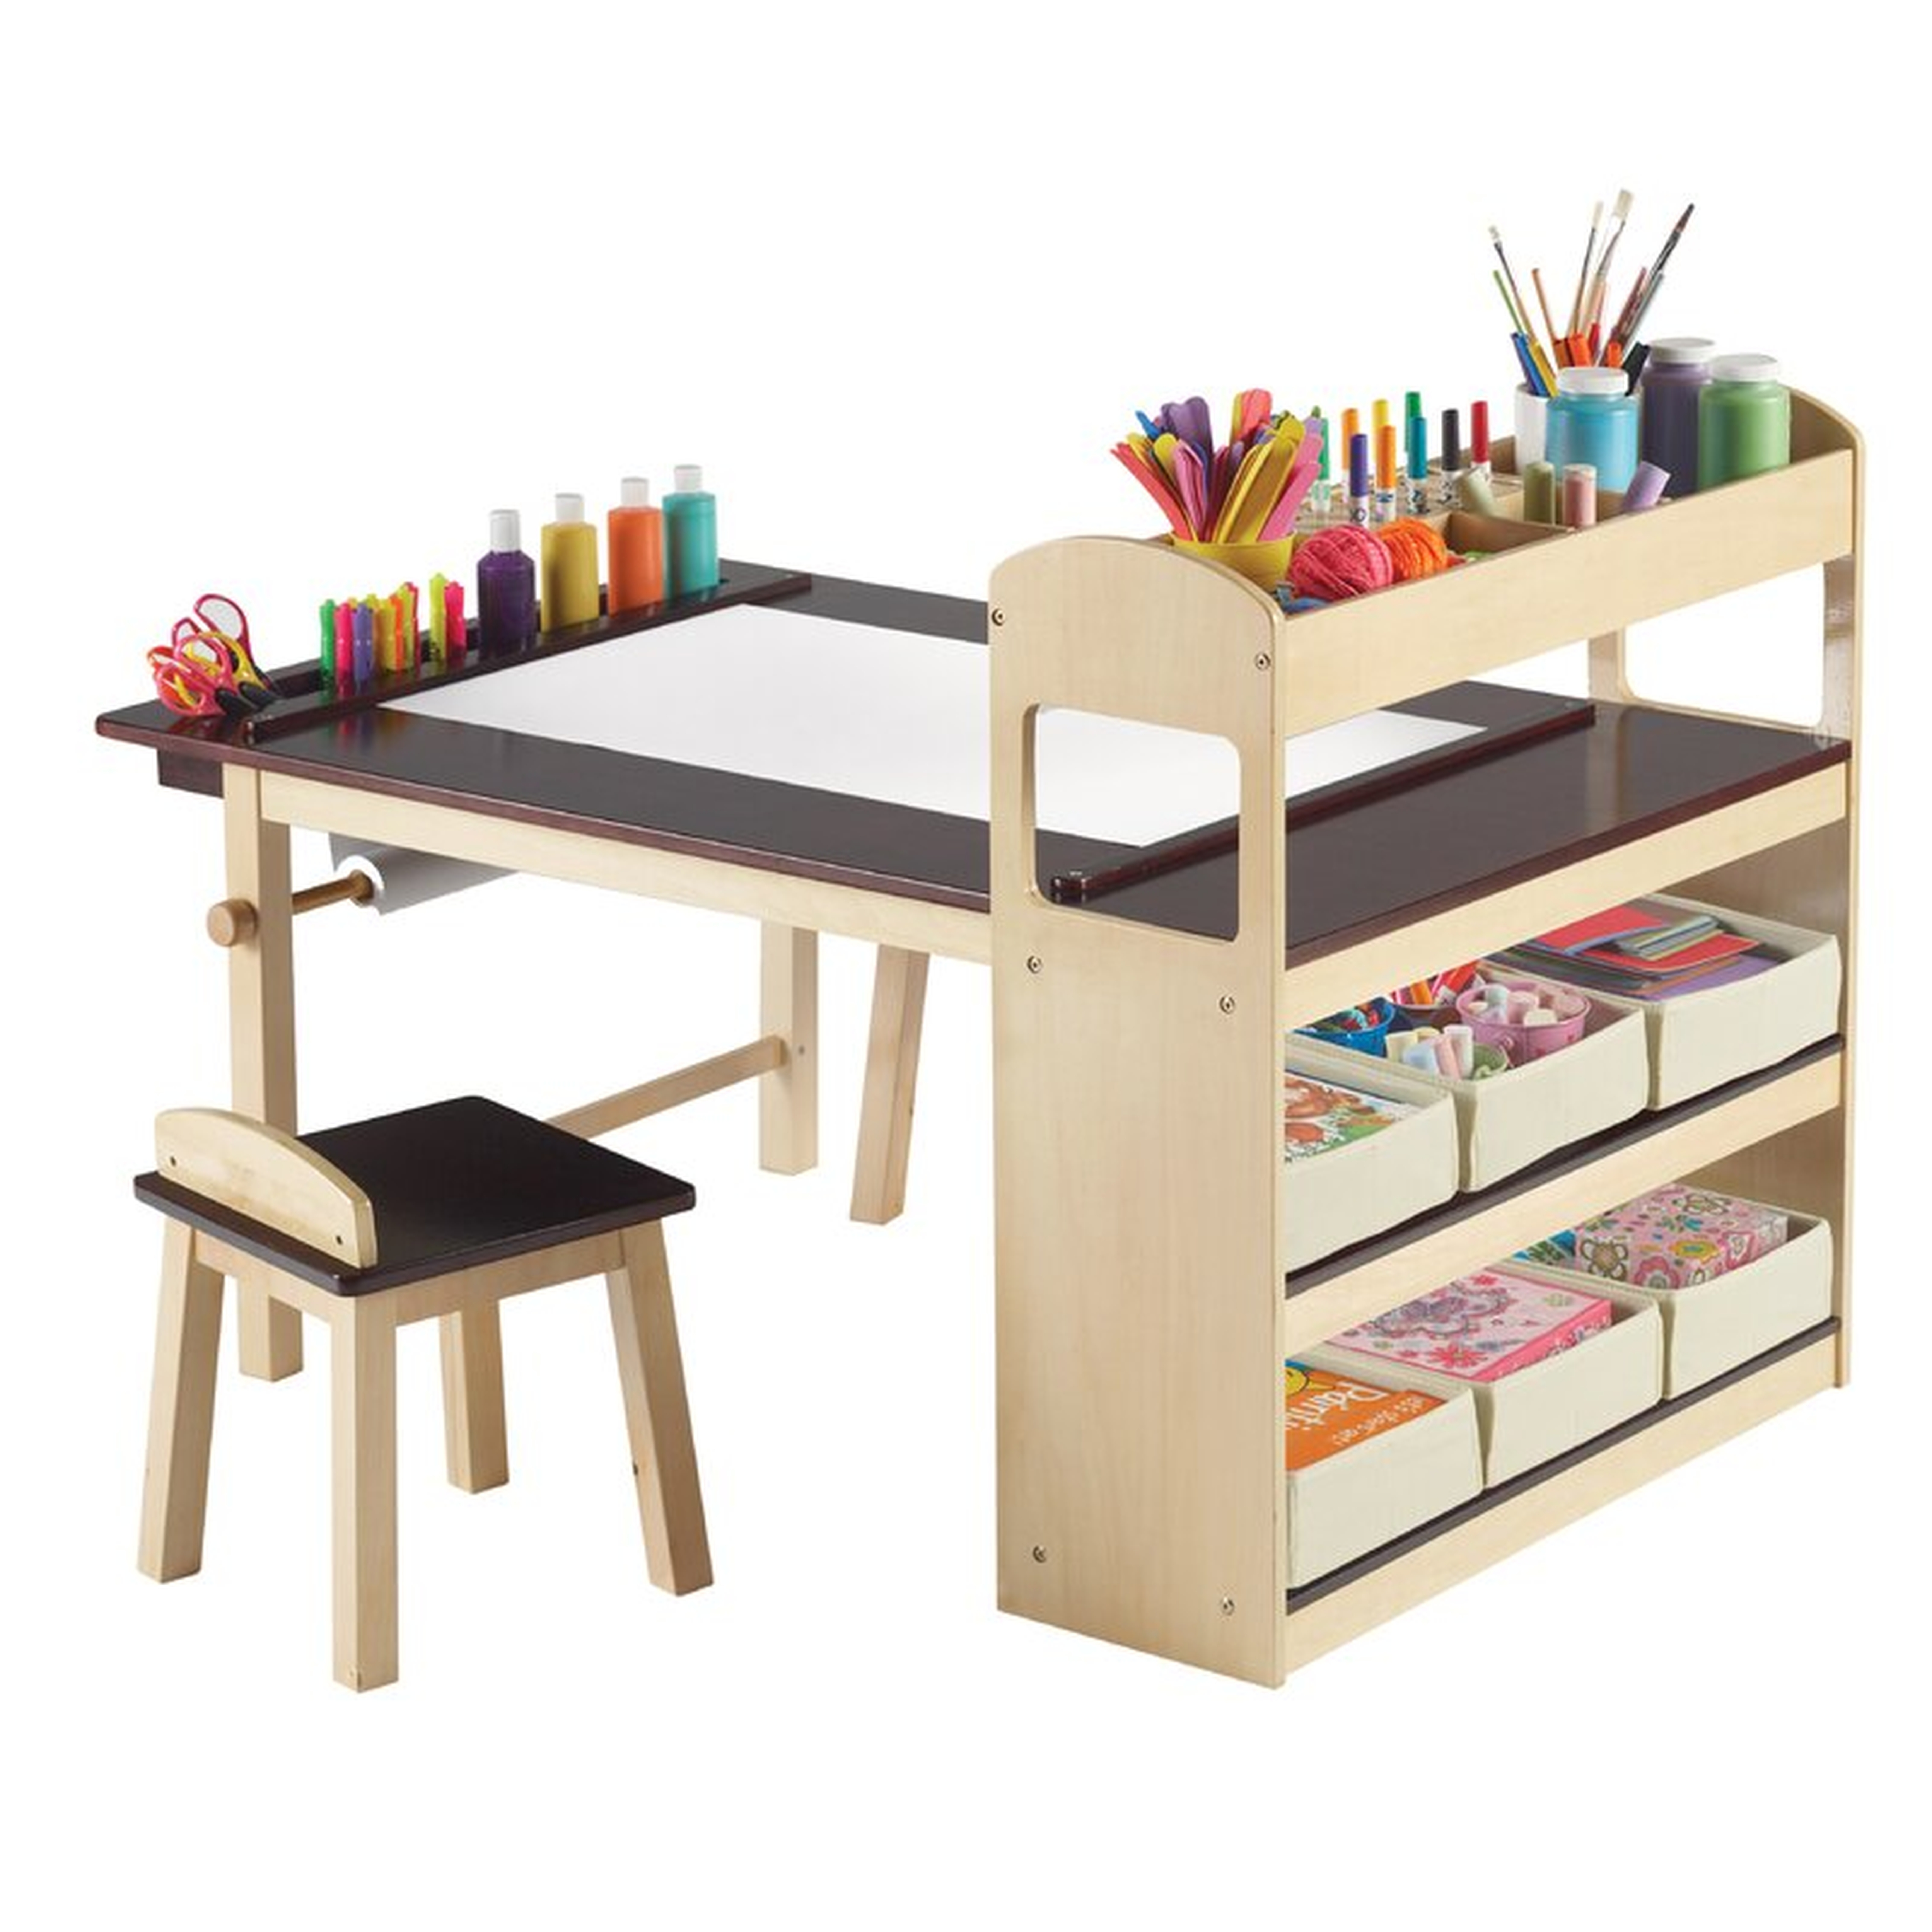 Emilio Kids 3 Piece Arts and Crafts Table and Chair Set - Wayfair